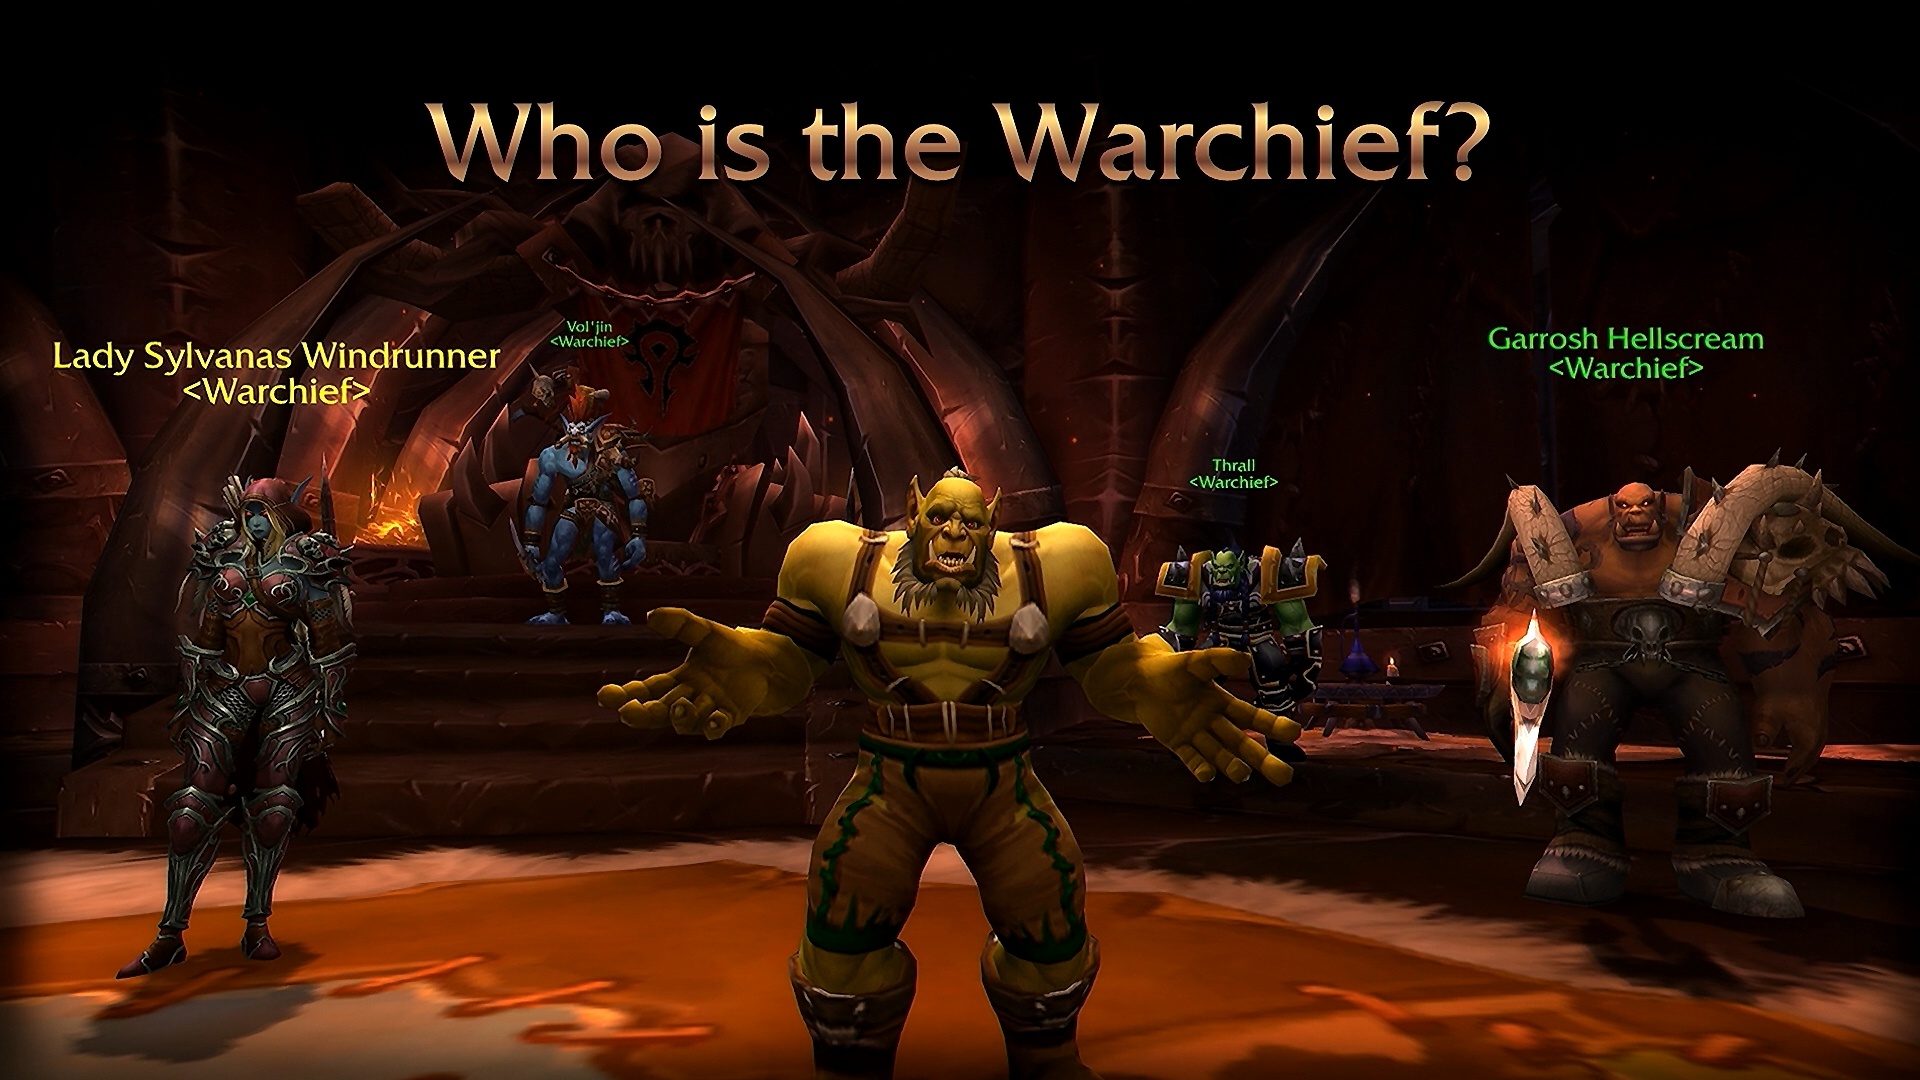 Who is the Warchief? Depends on which expansion you're playing